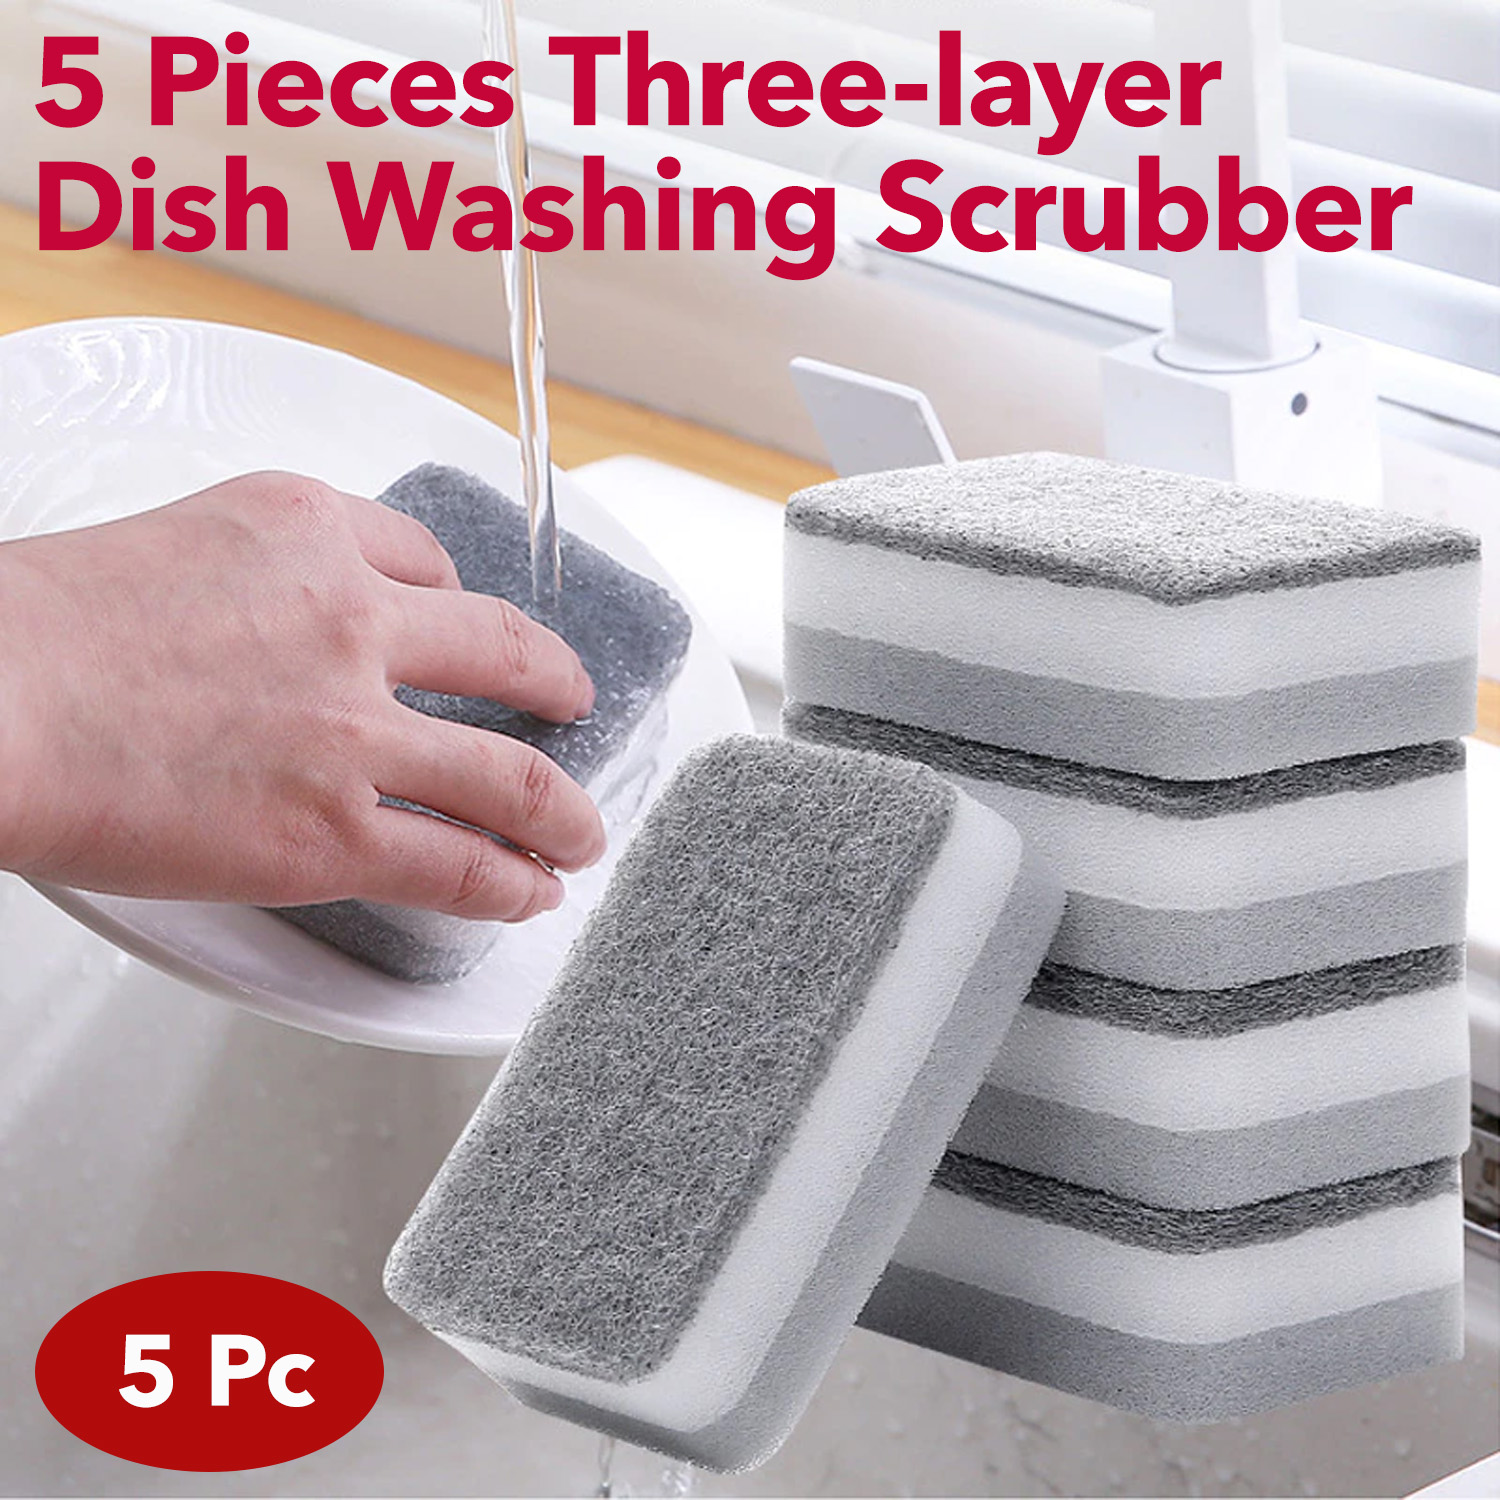 5 Pieces Double-Sided Three-layer Sponge Kitchen Household Dish Washing Scrubber Sponge